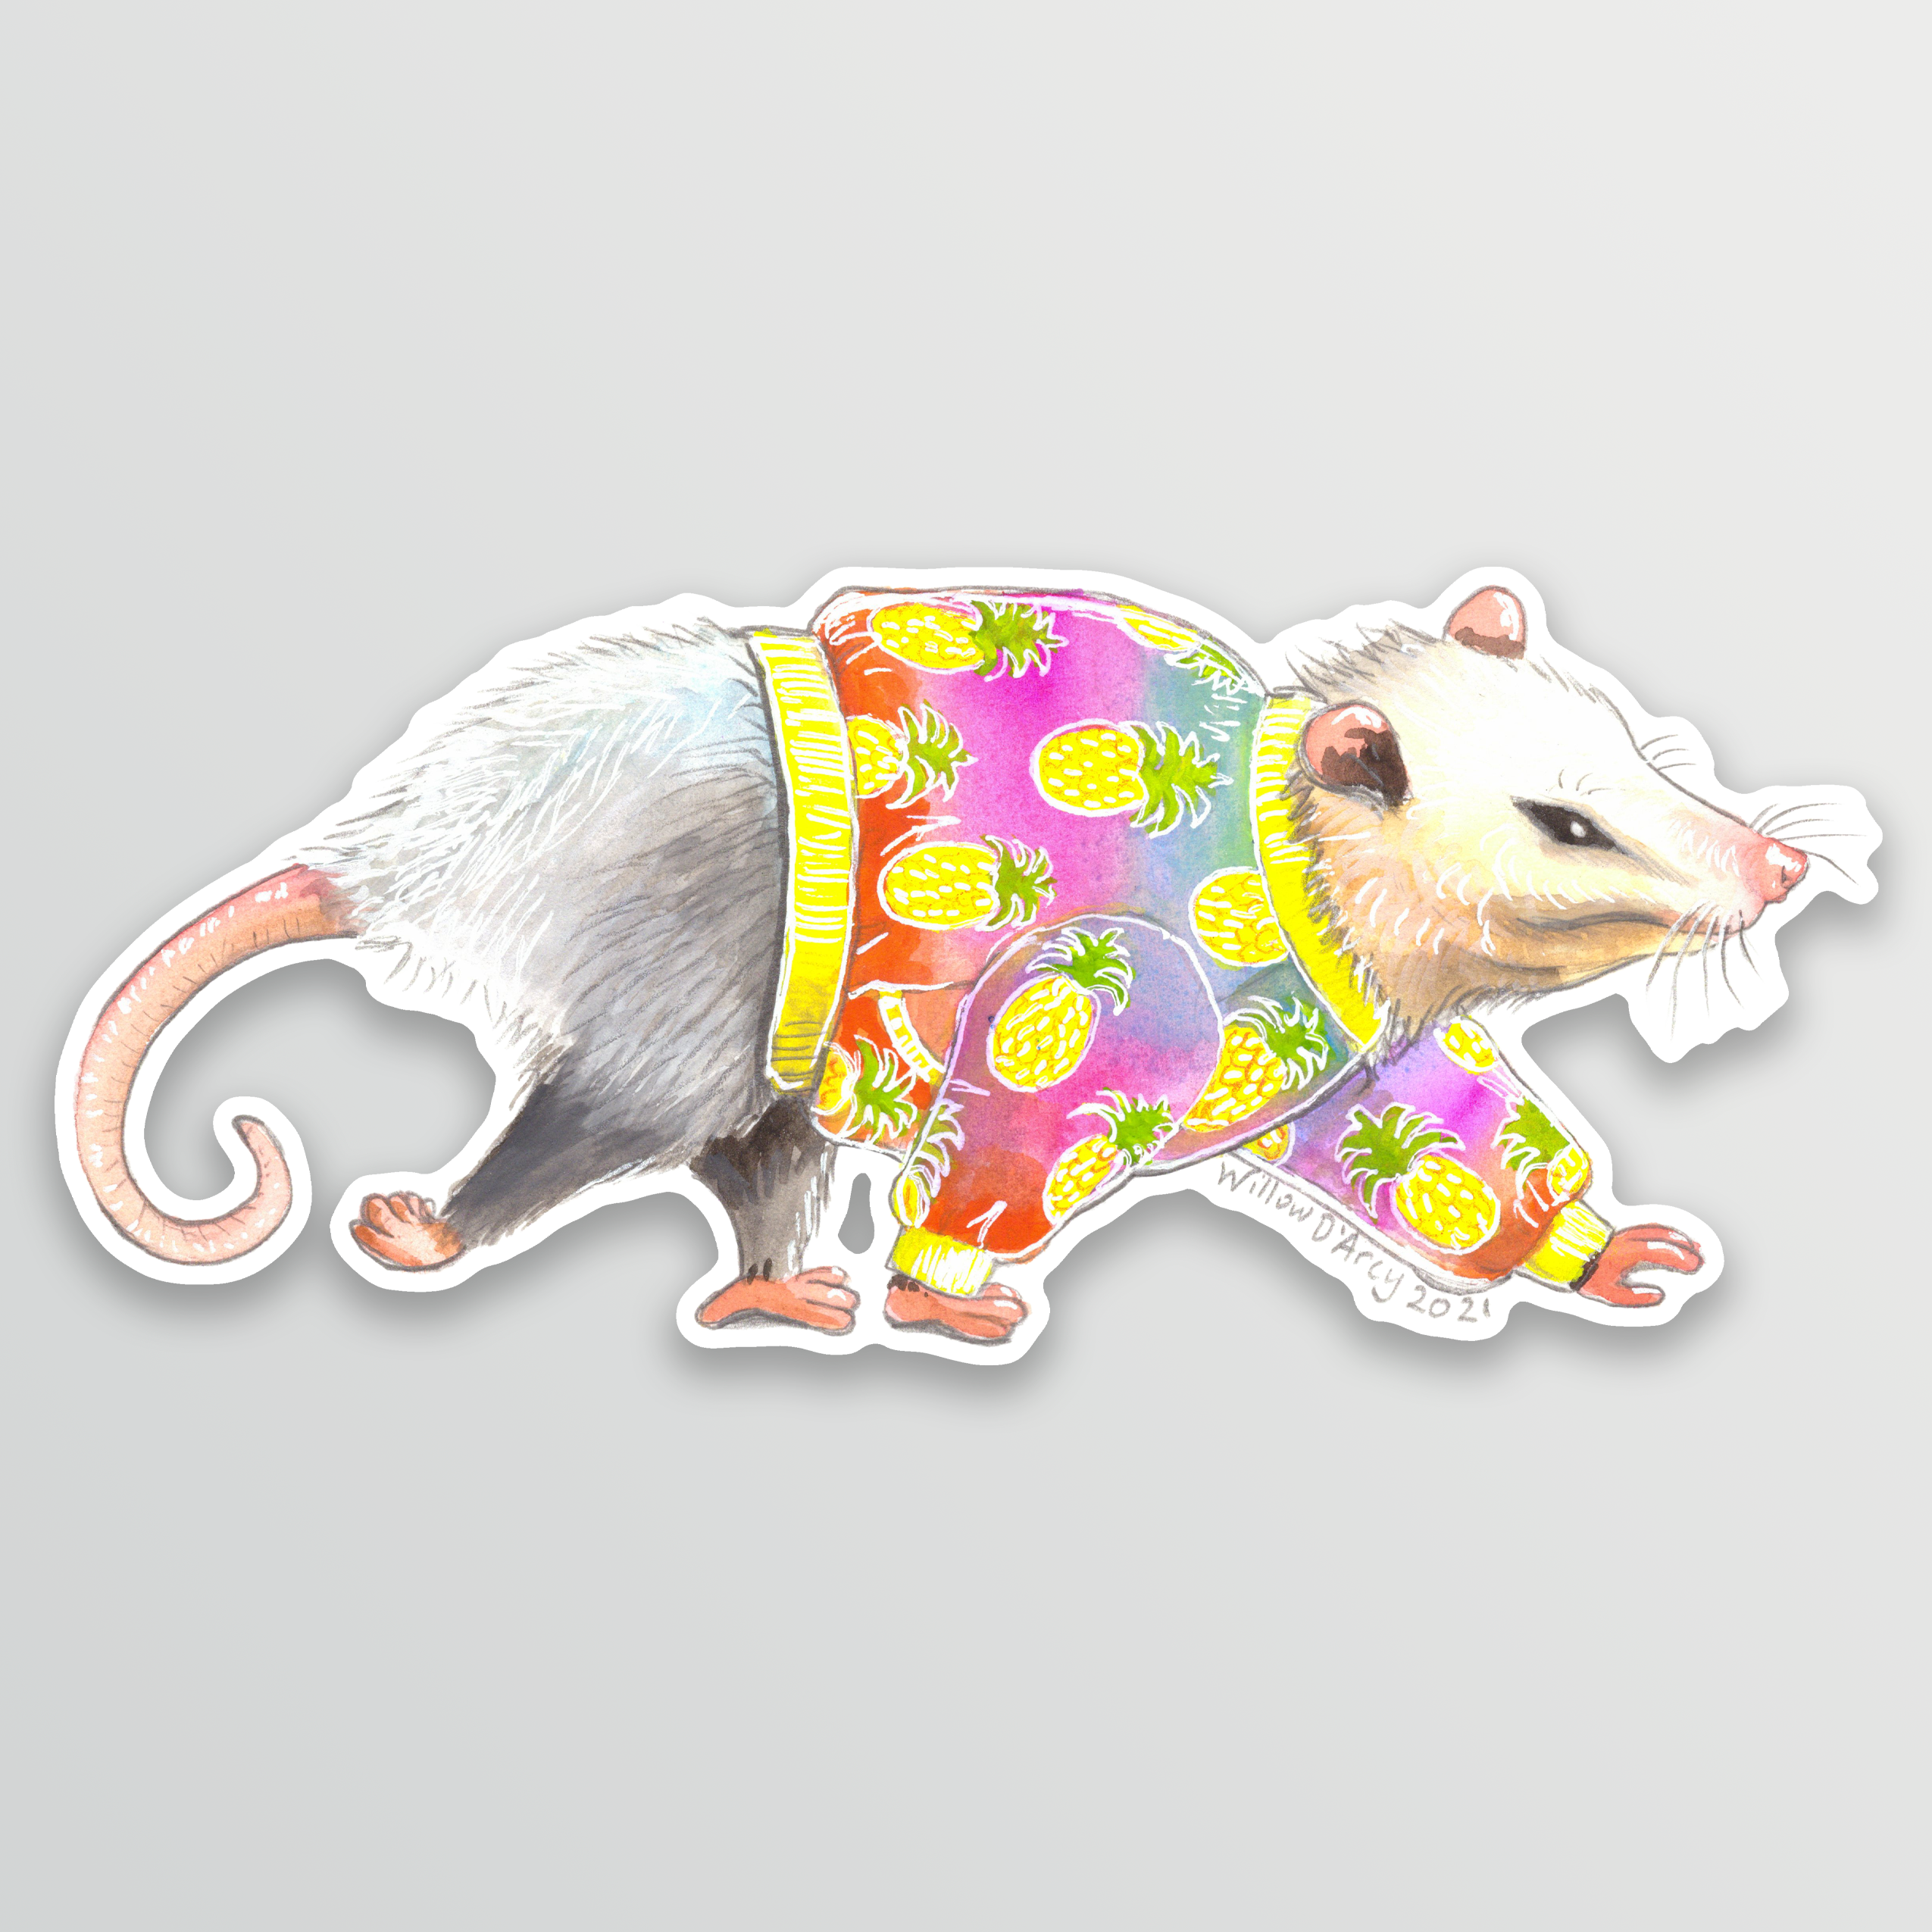 Sticker of an illustration of an opossum wearing a jacket with a pineapple print.